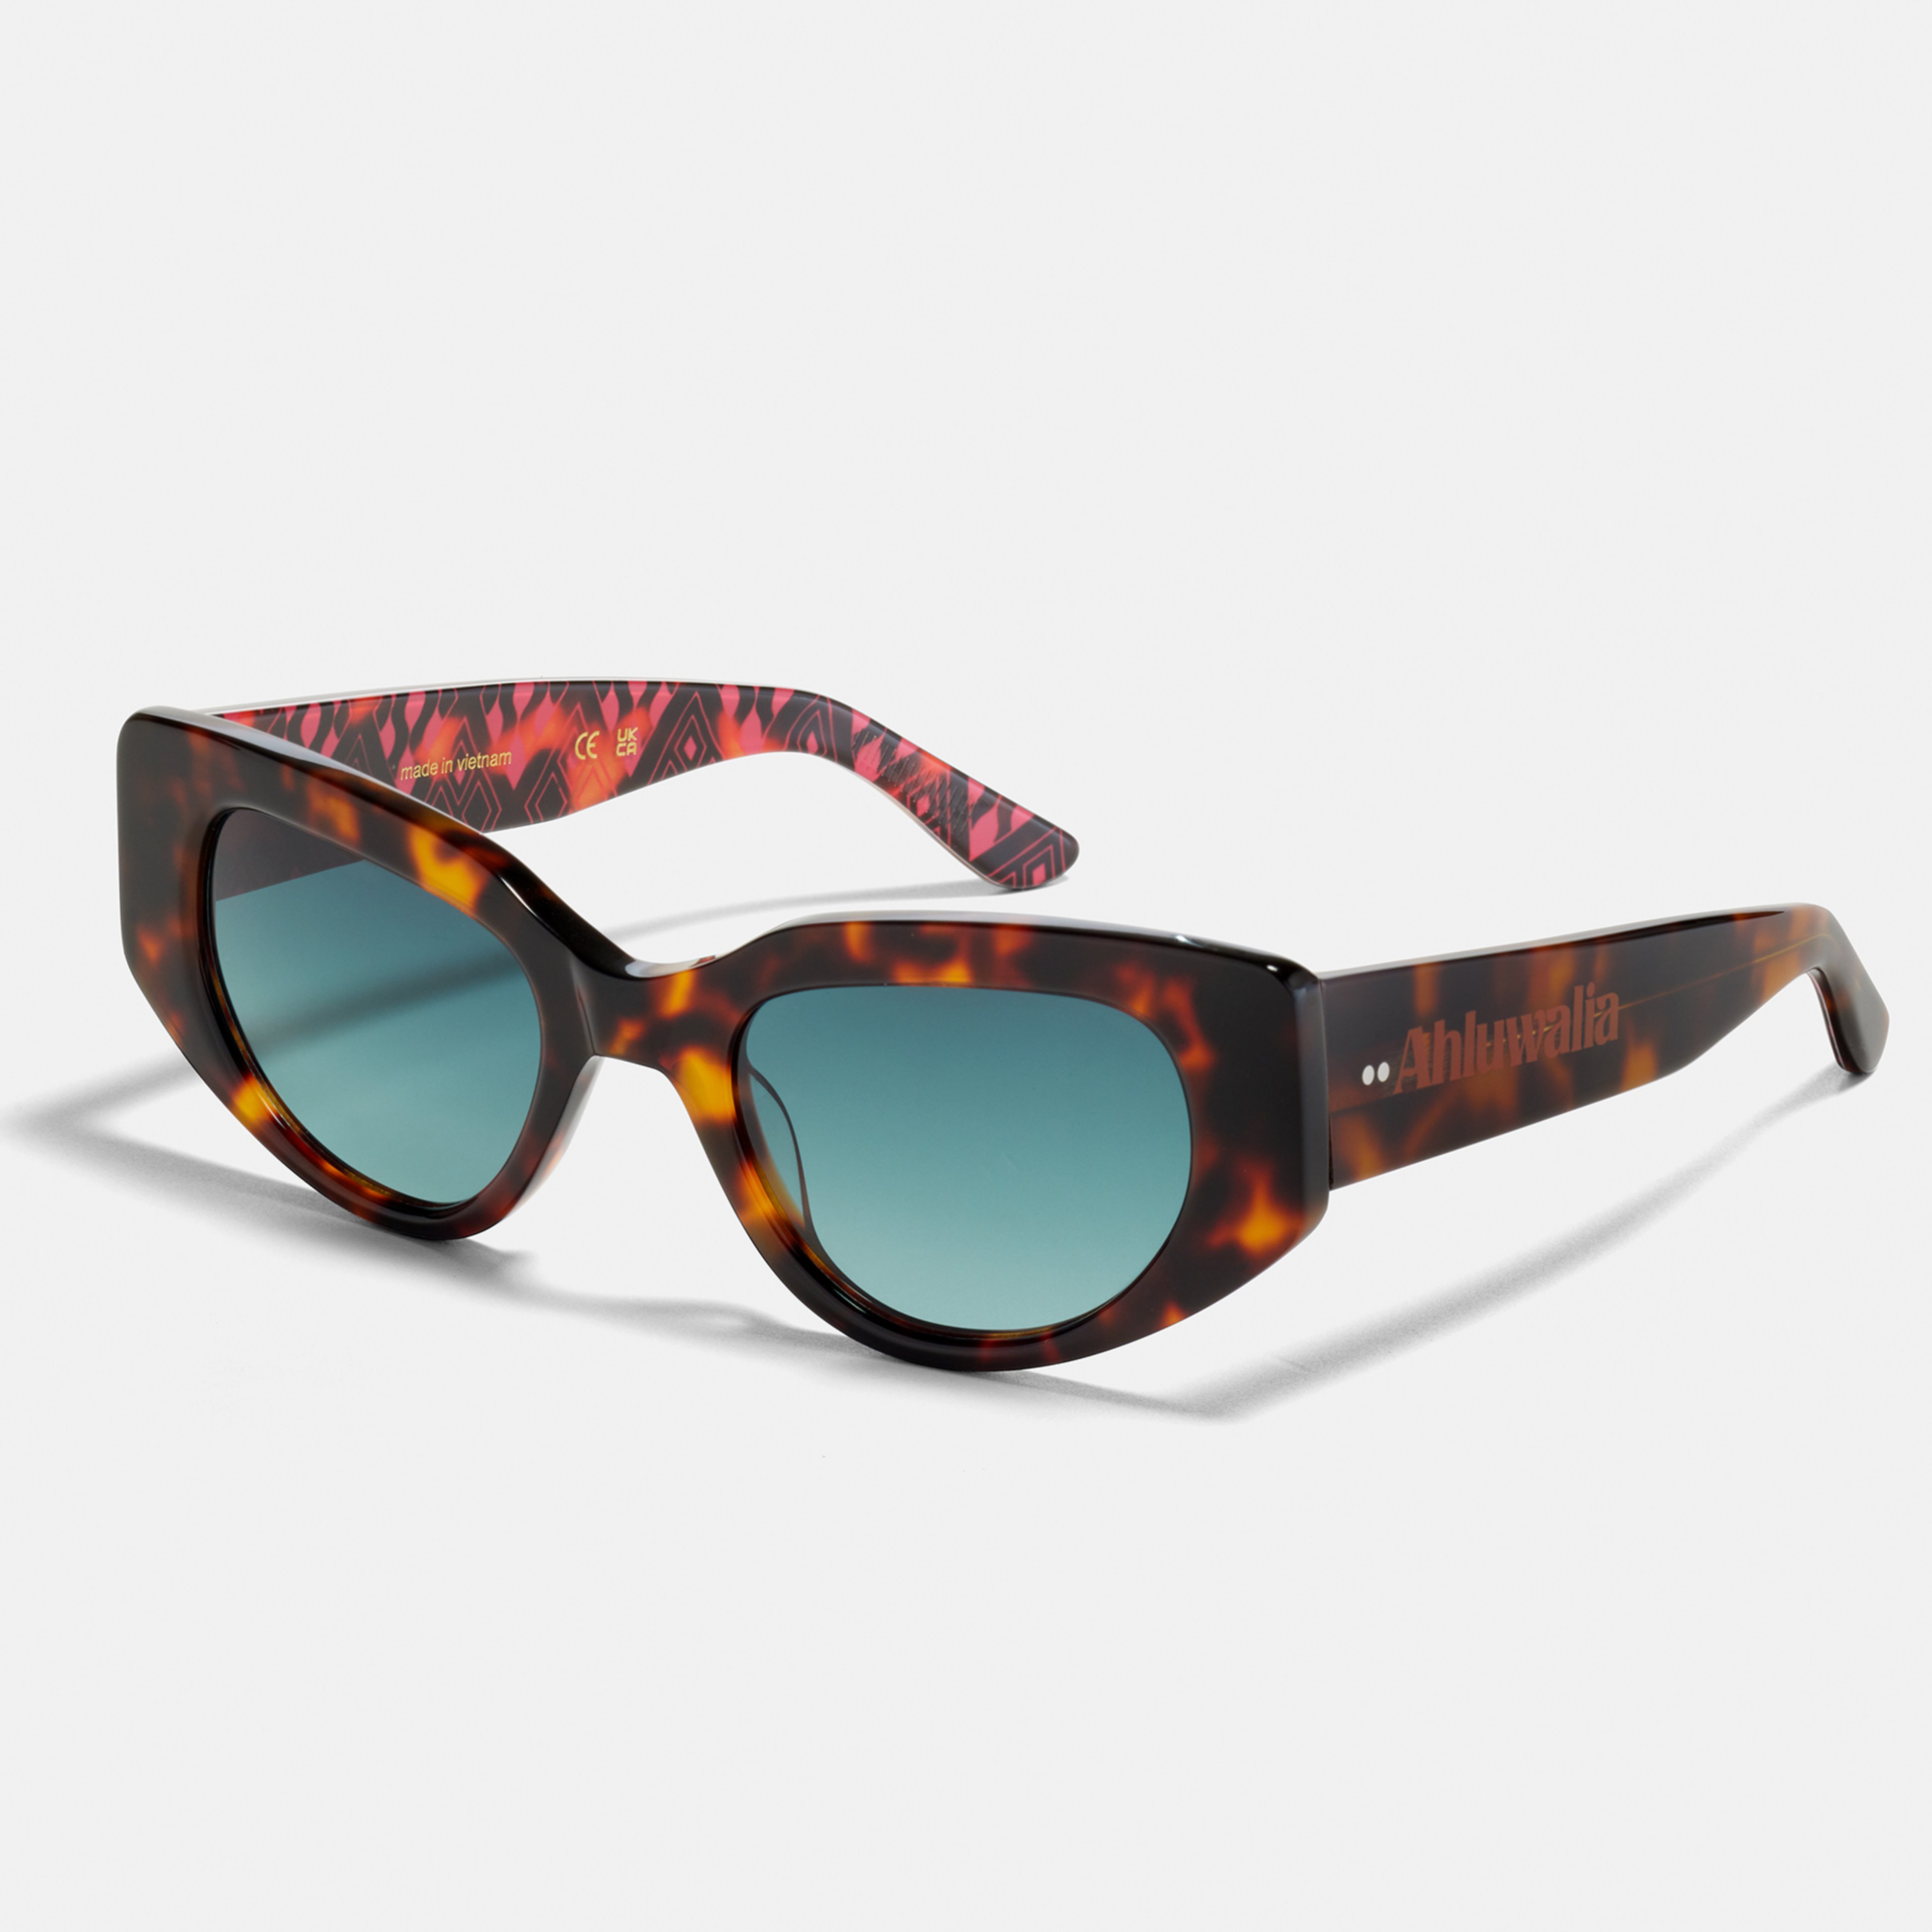 Ace & Tate Solaires | oval Acétate in Marron